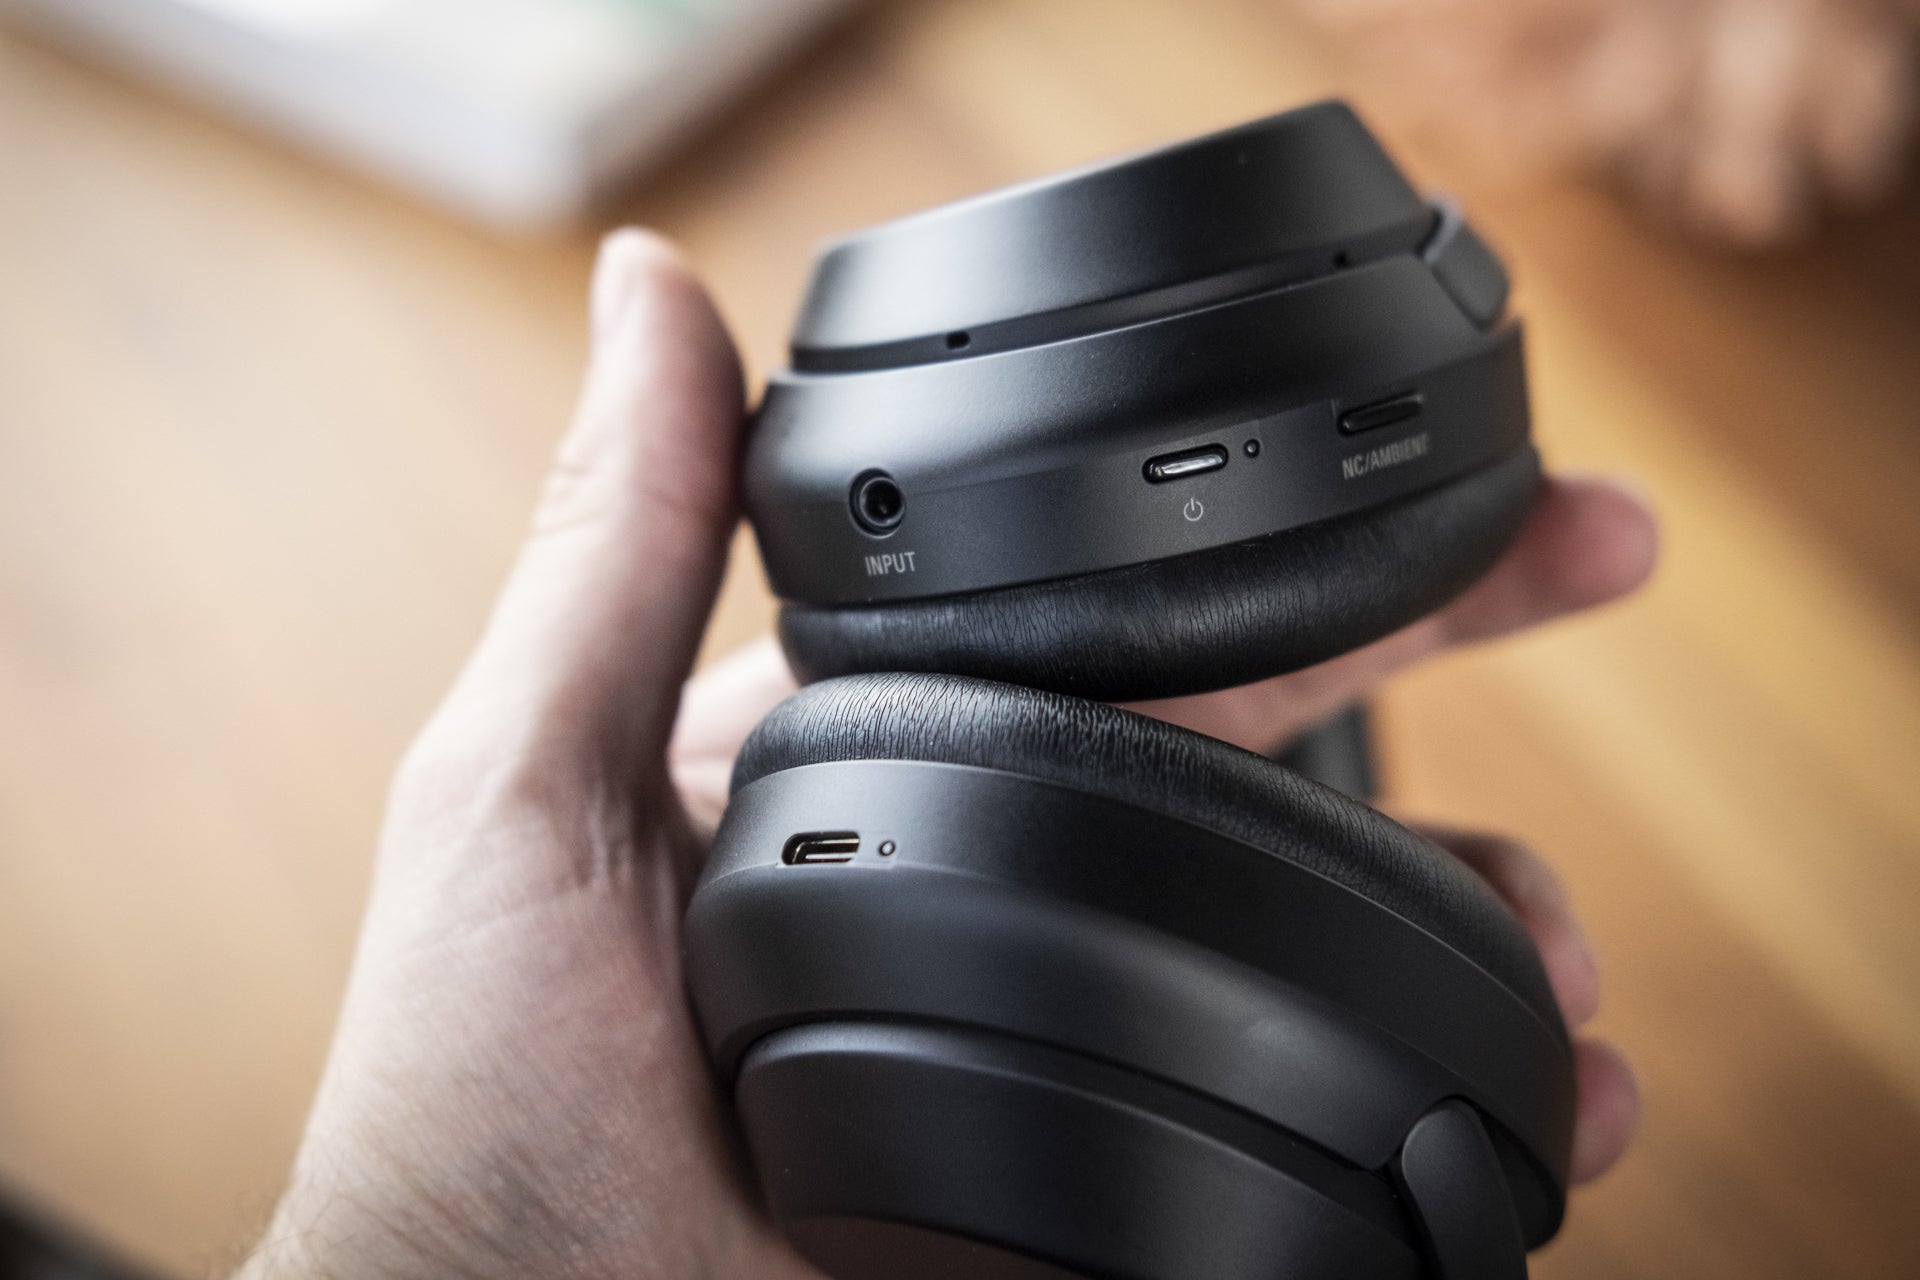 Sony WH-1000XM3 wireless headphones review: The epitome of effective active noise cancellation